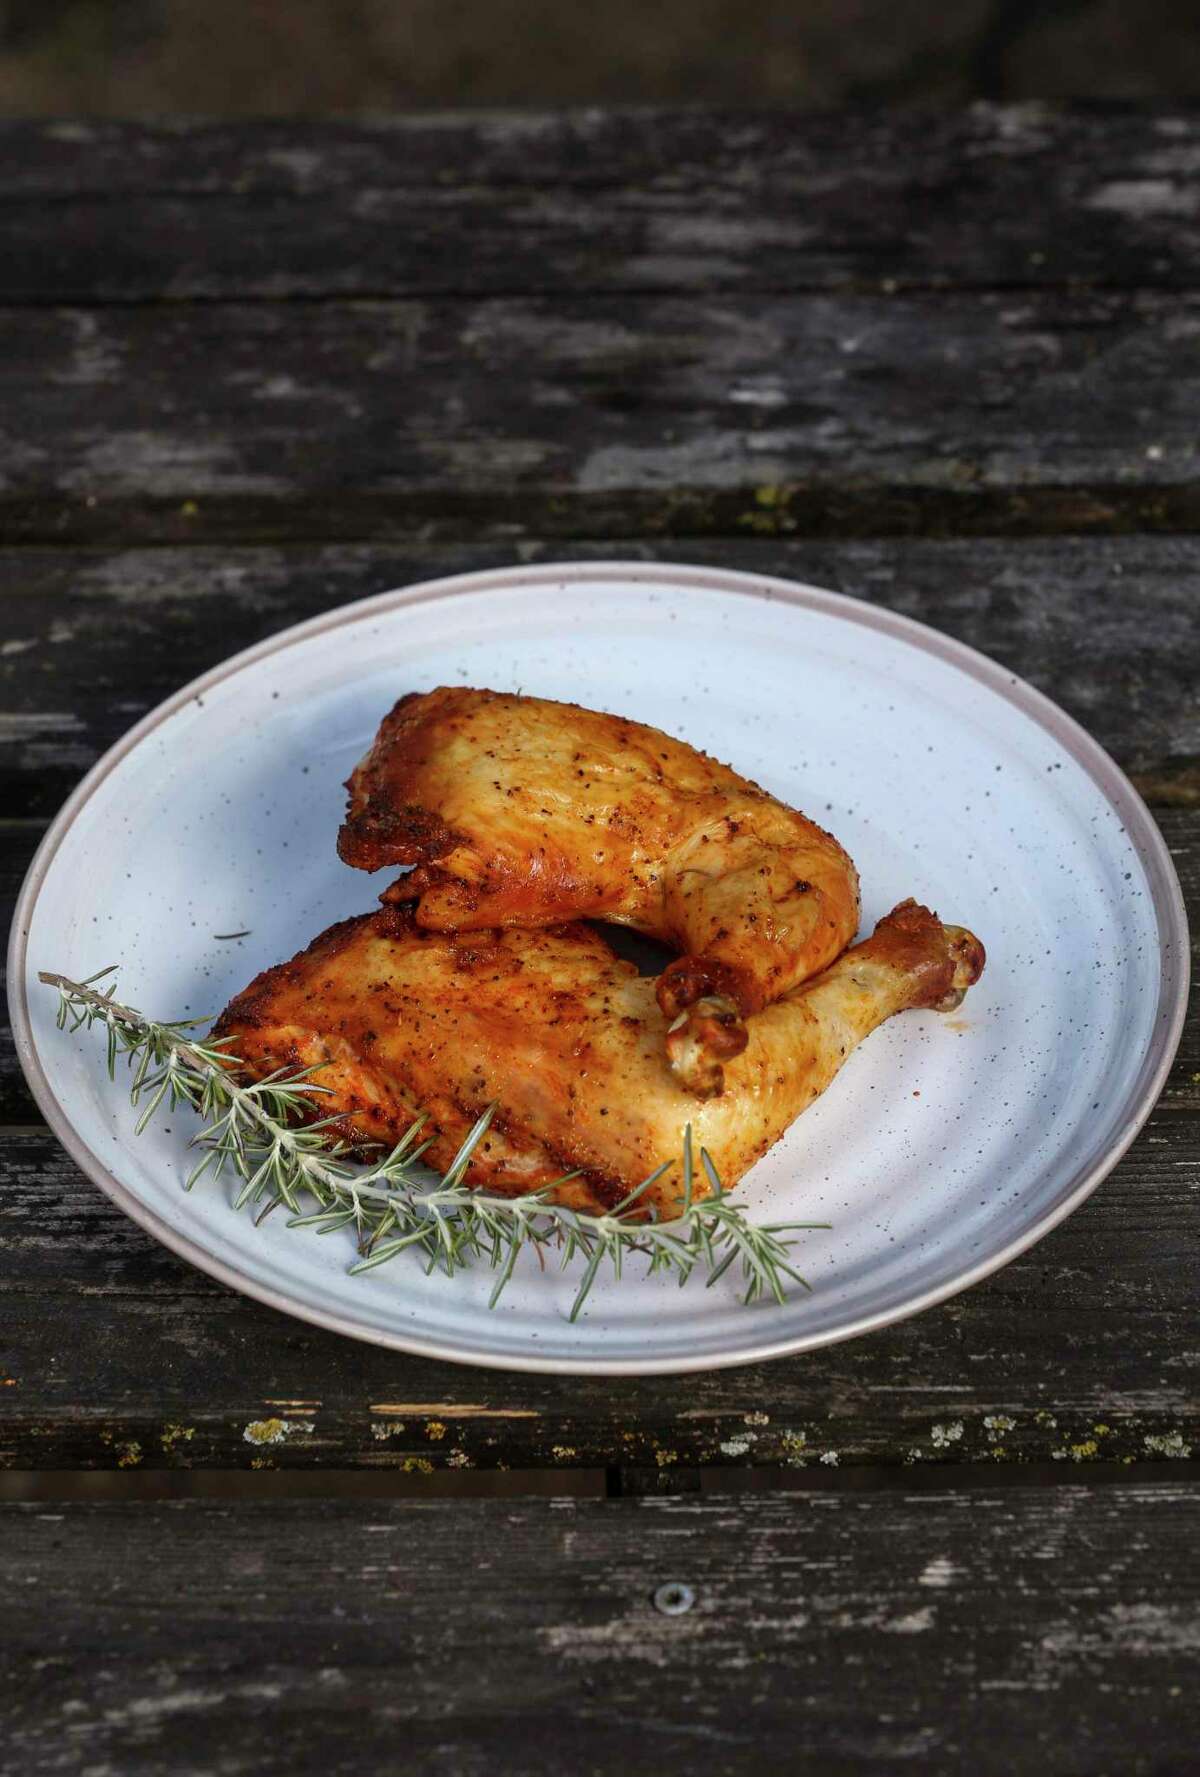 Oven-roasted chicken quarters with crispy skin